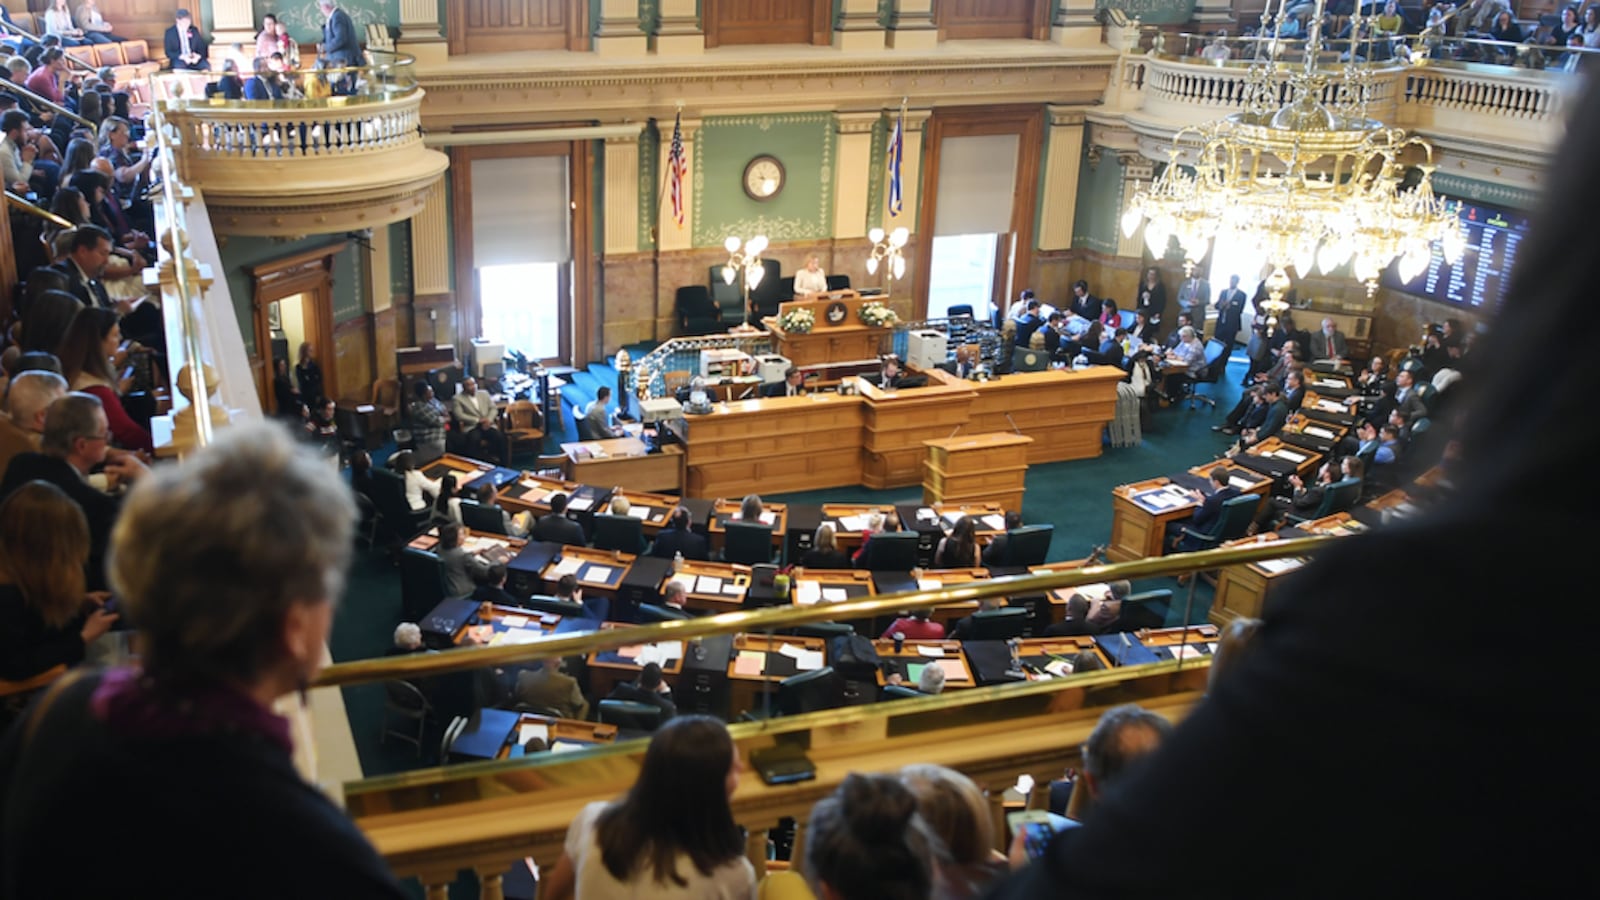 Speaker of the House K.C. Becker addresses the Colorado House of Representatives on opening day, Jan. 8, 2020.